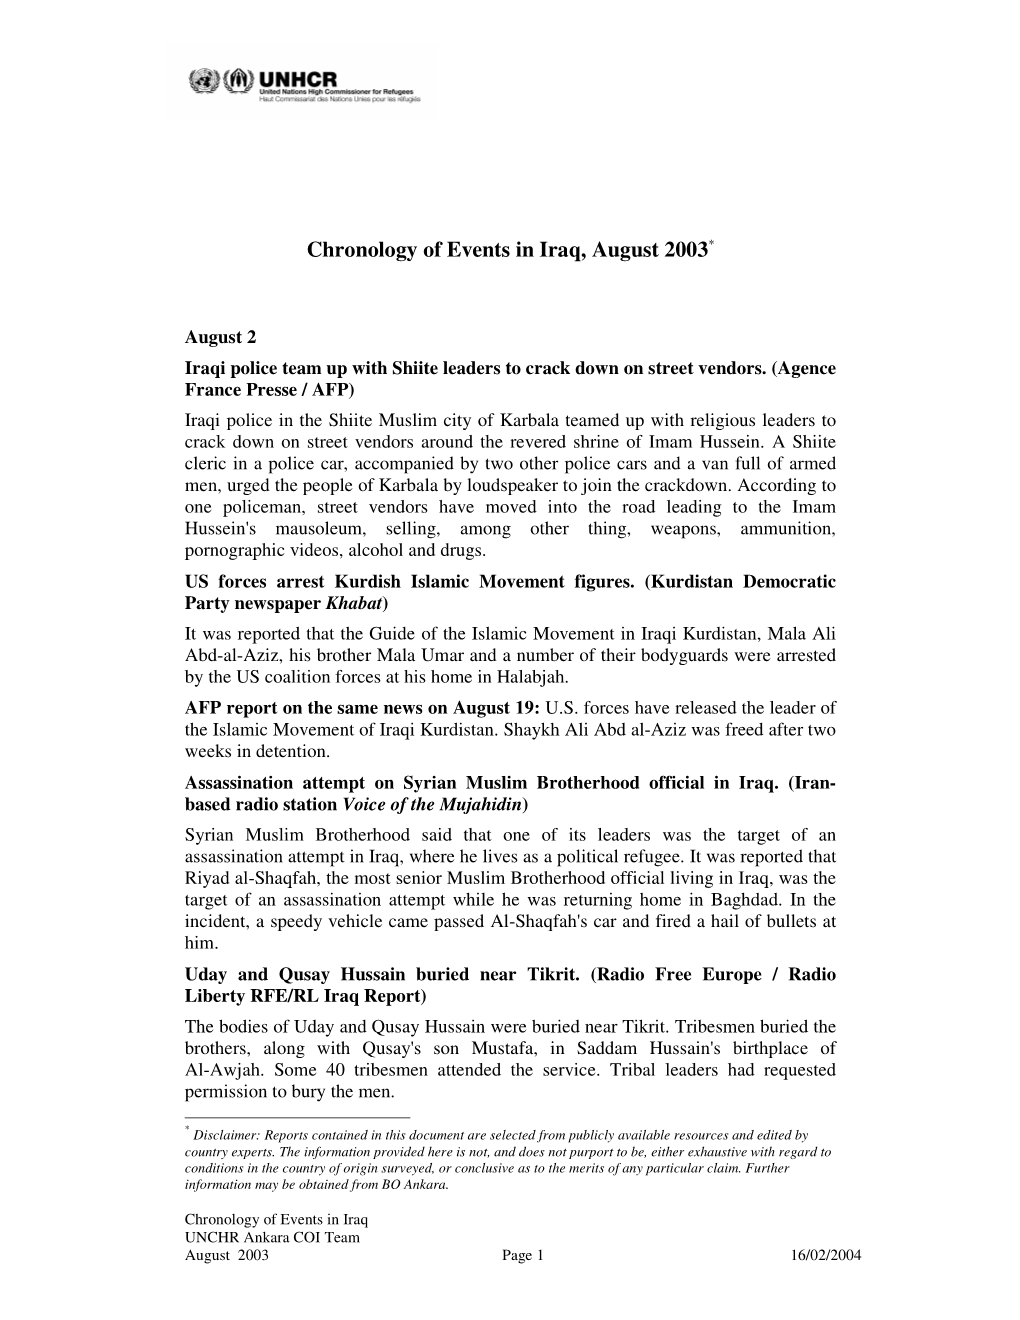 Chronology of Events in Iraq, August 2003*